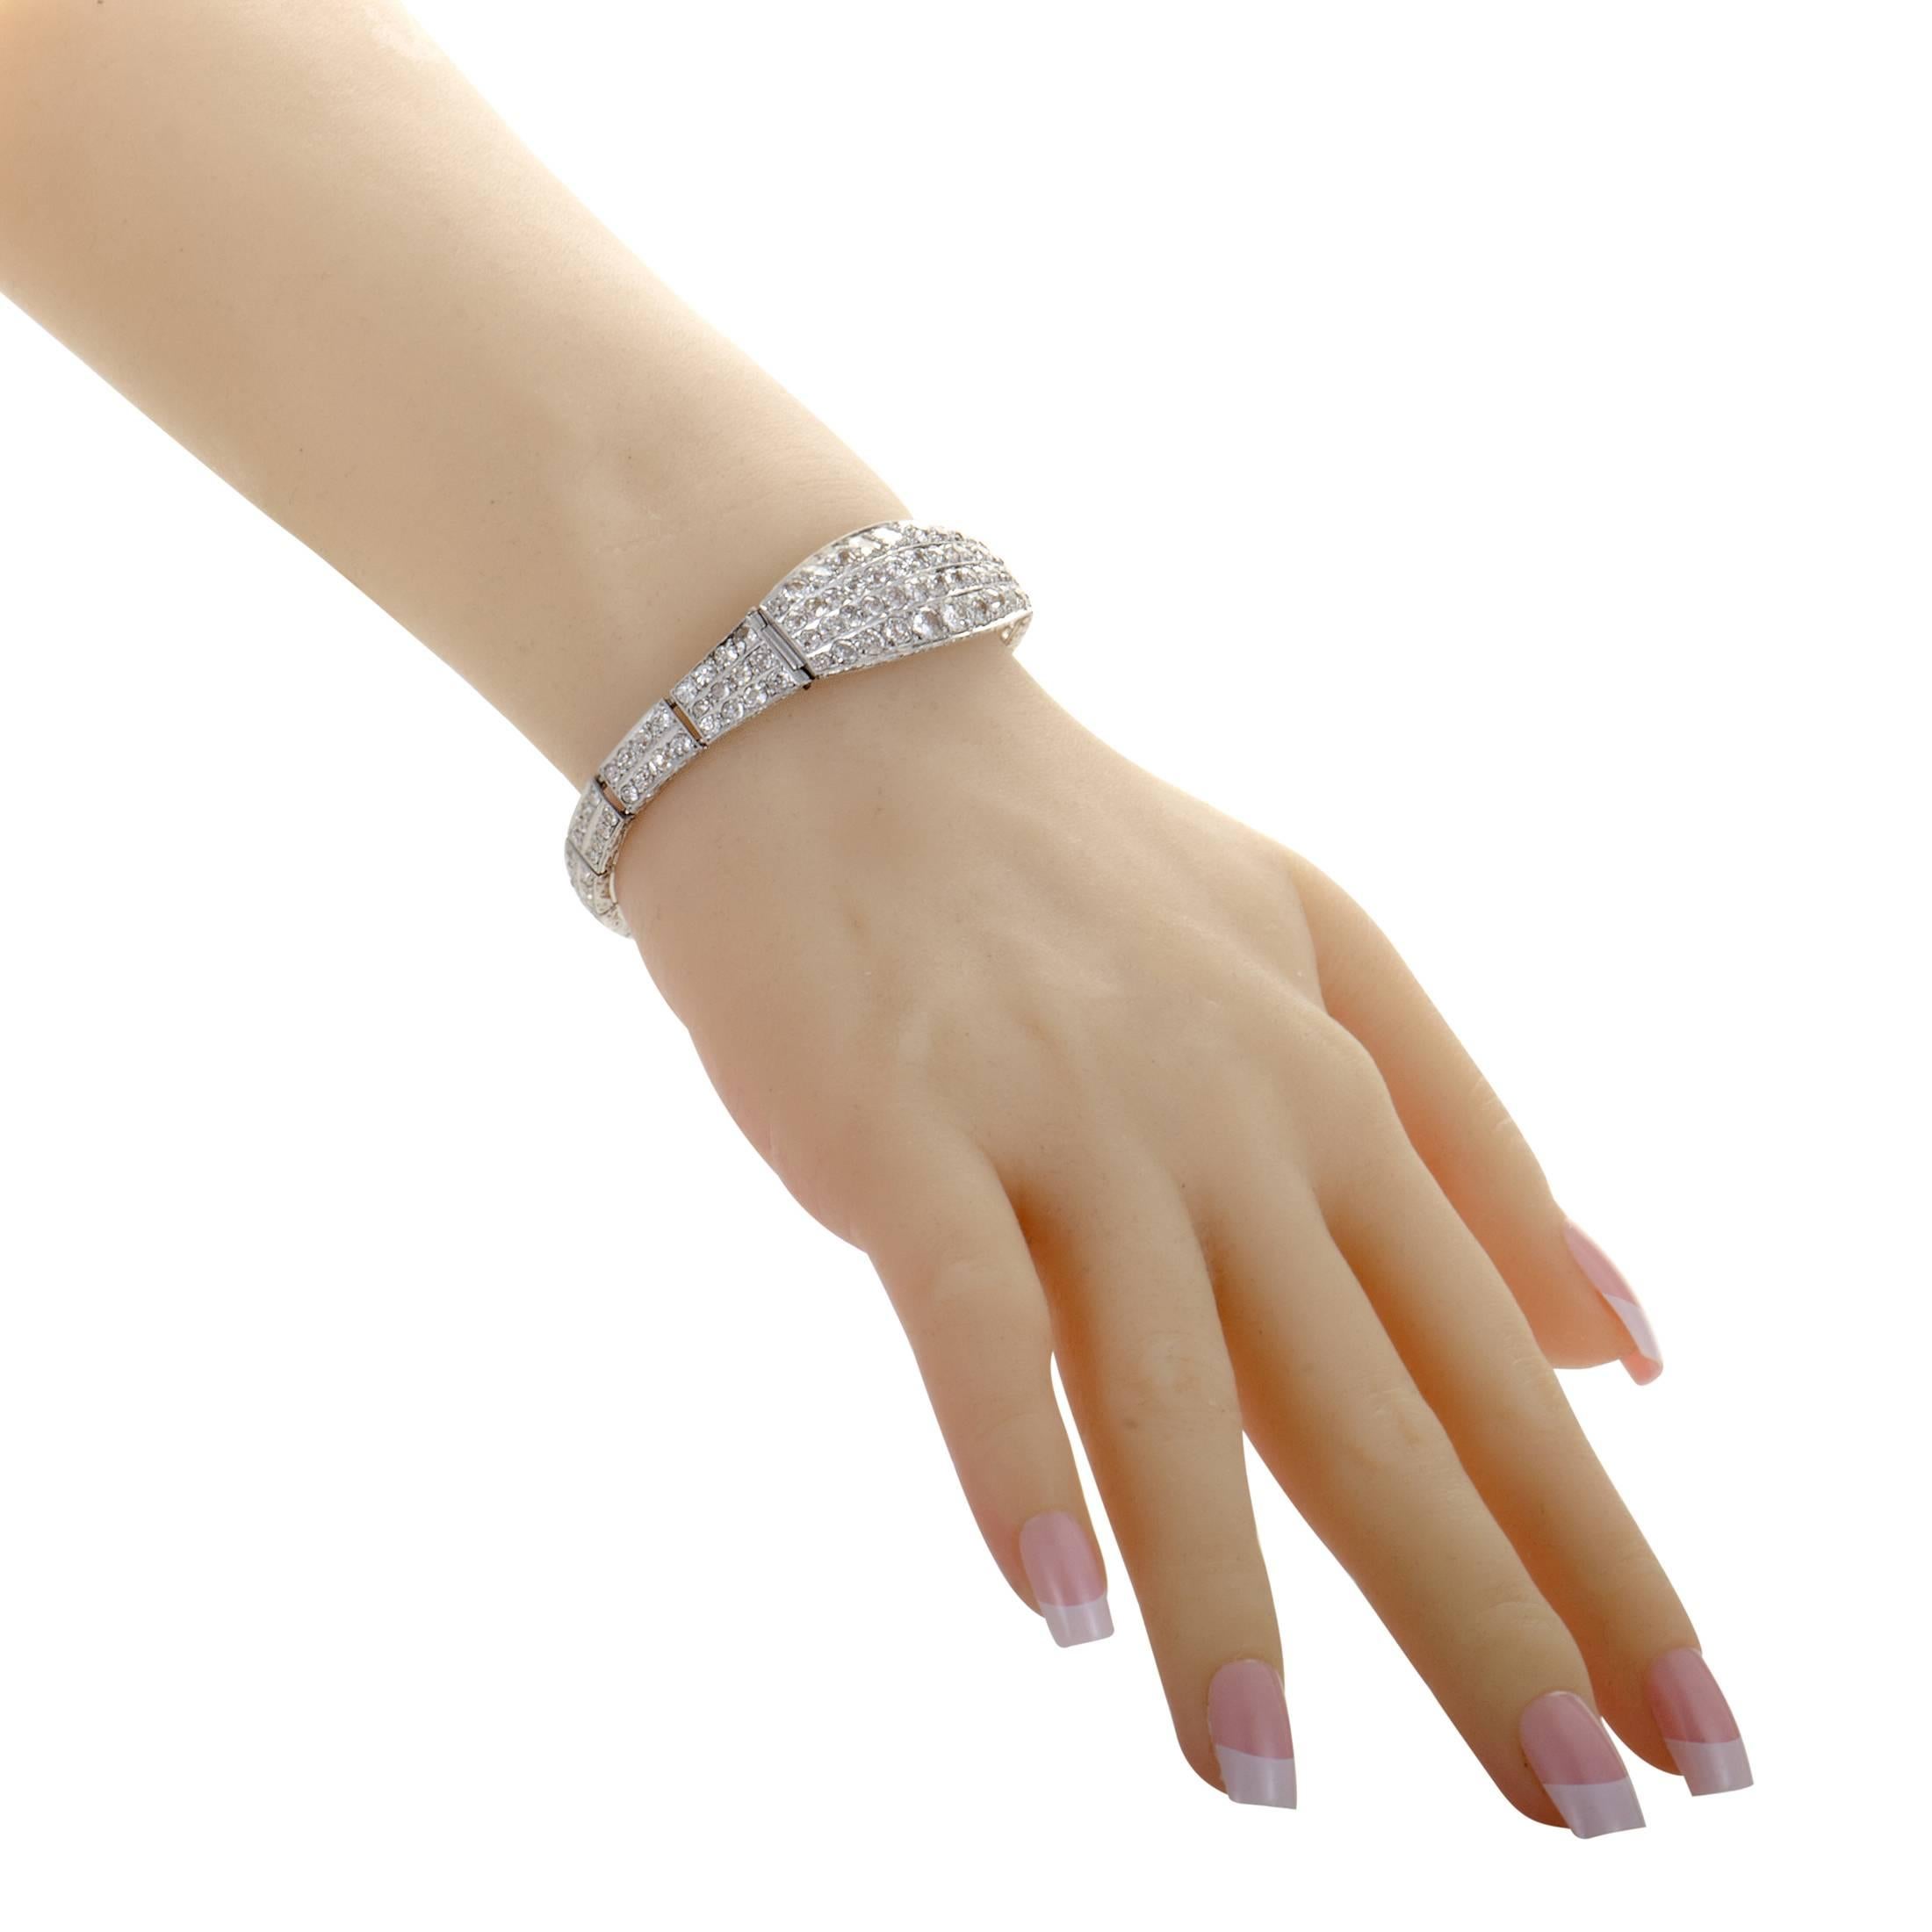 An astonishing show of pure prestige, tasteful exuberance and wonderful harmony, this dazzling bracelet is made of shimmering 18K white gold which is almost entirely paved with tantalizing diamonds weighing in total approximately 12.00 carats.
